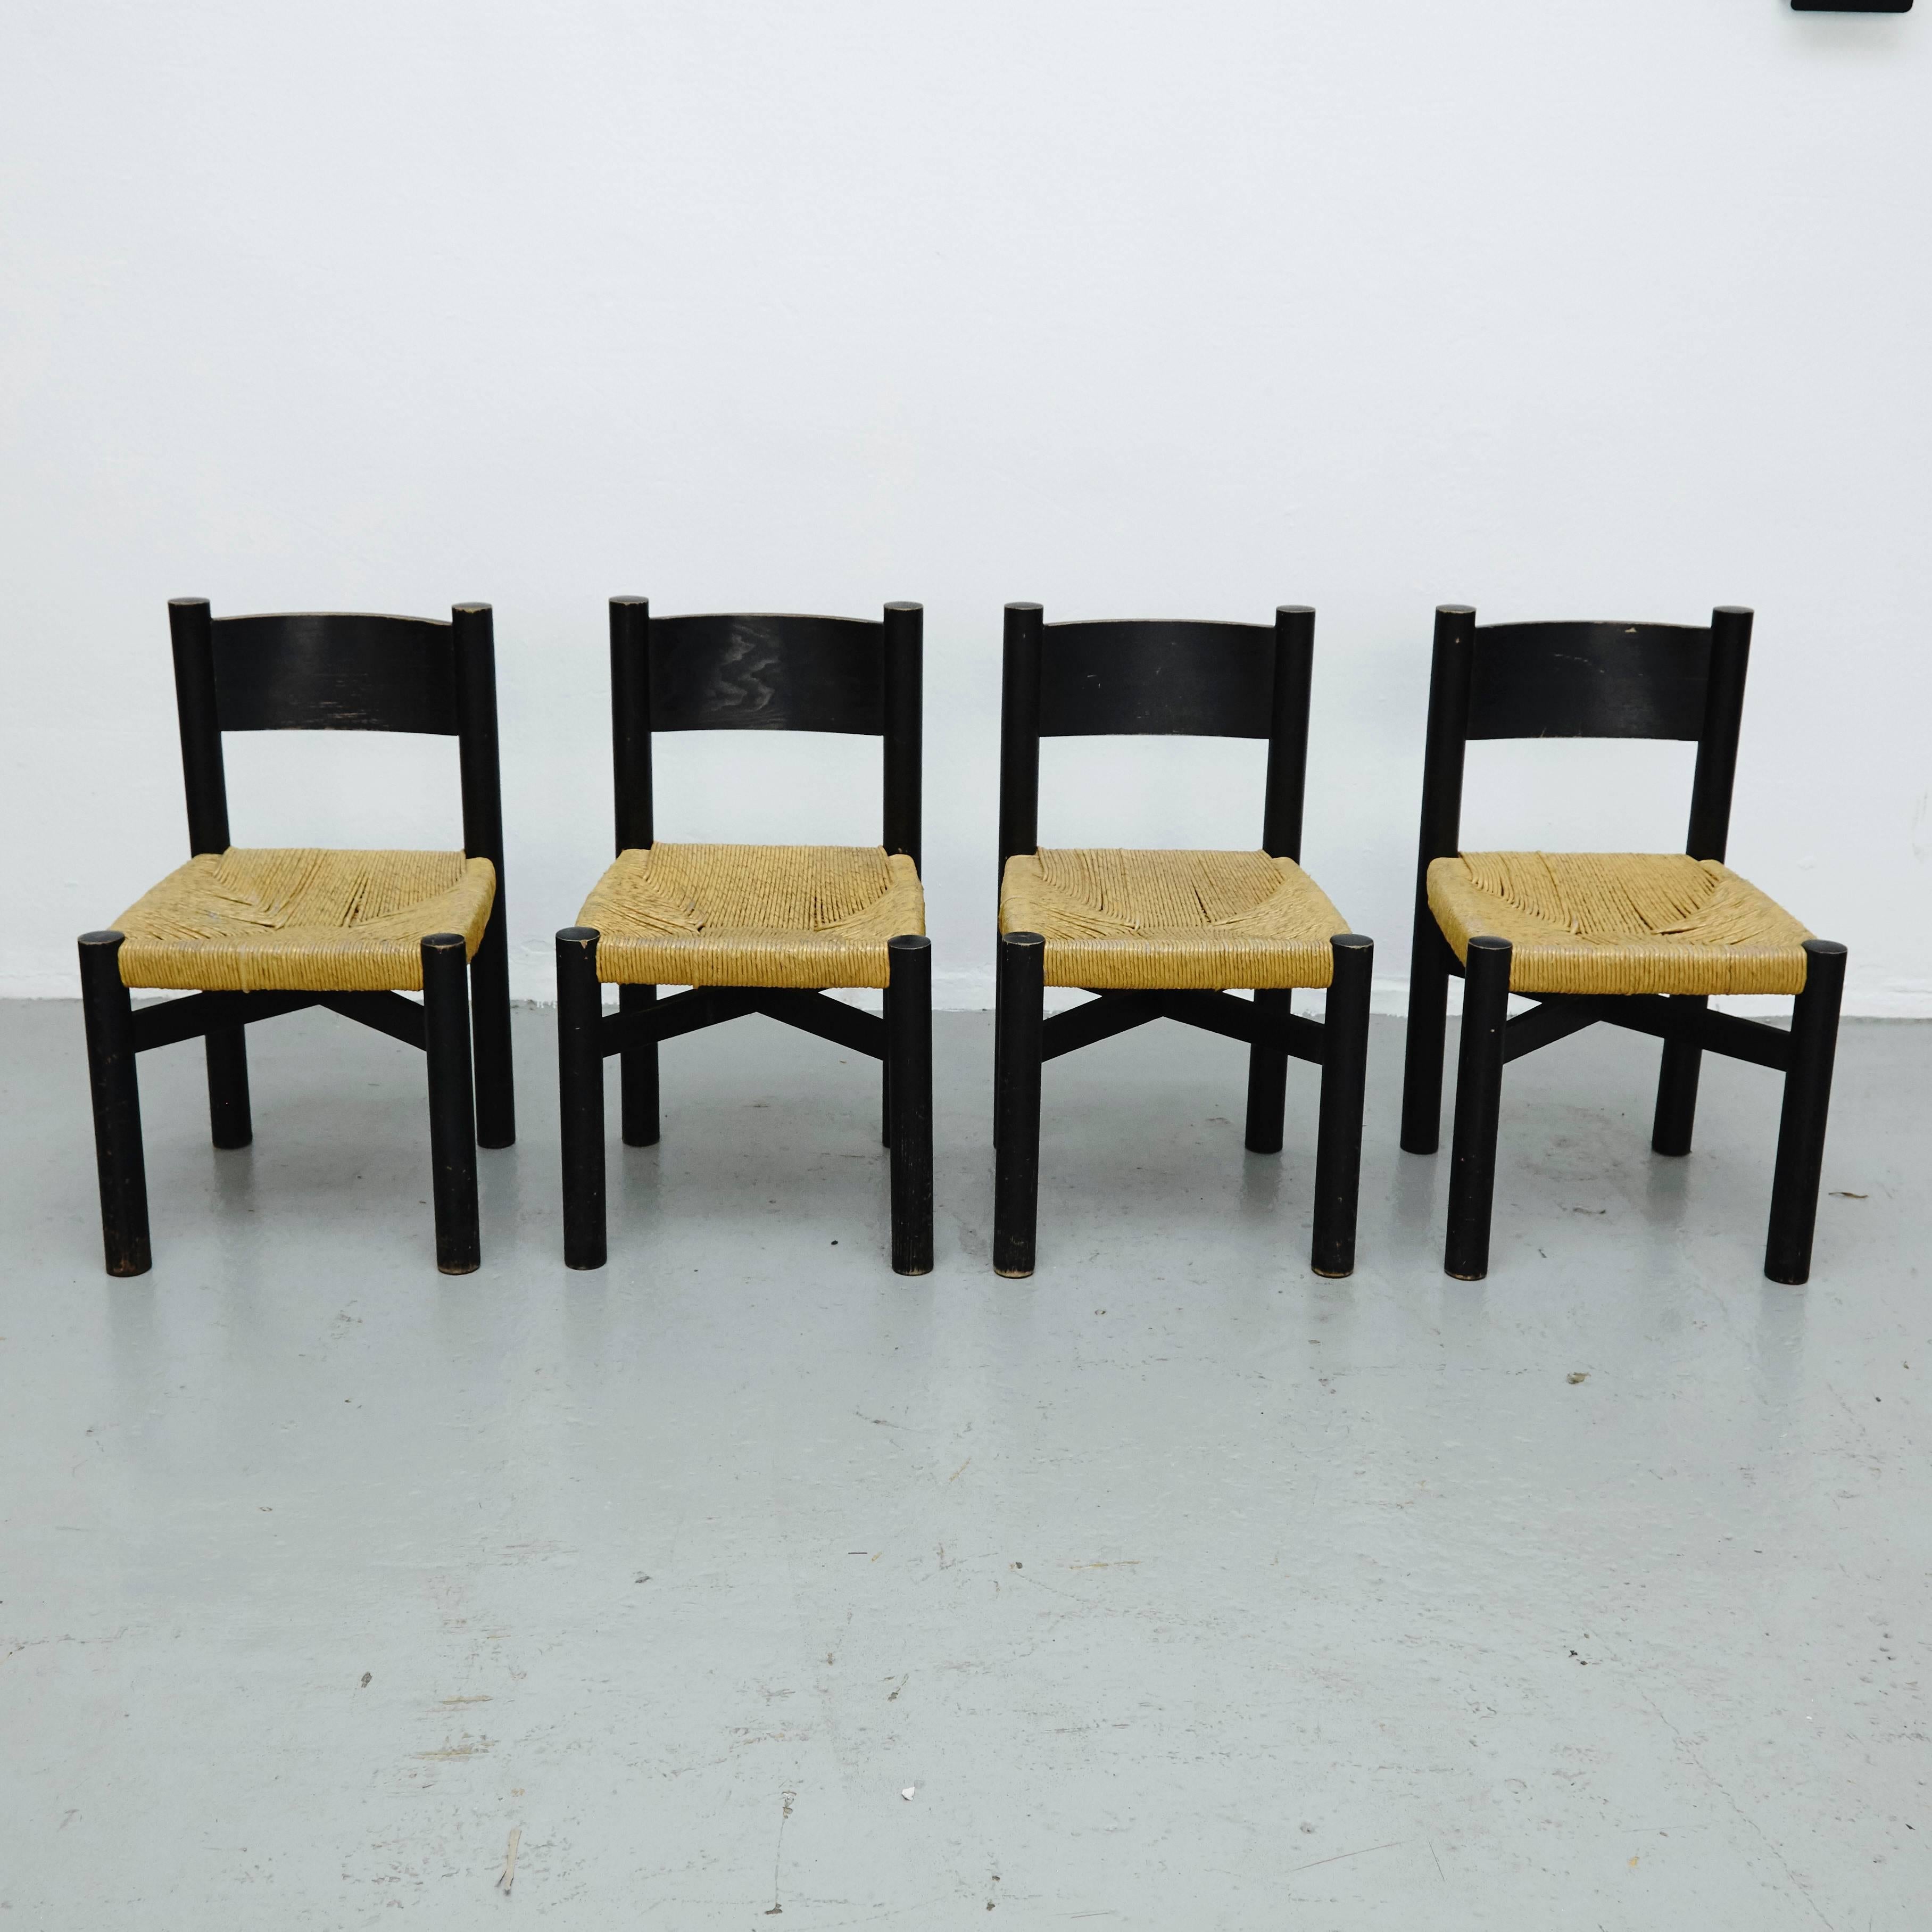 Four chairs, model meribel, designed by Charlotte Perriand, circa 1950.
Manufactured in France.
Wood and rattan. Black lacquer

In good original condition with minor wear consistent with age and use, preserving a beautiful patina.

Charlotte